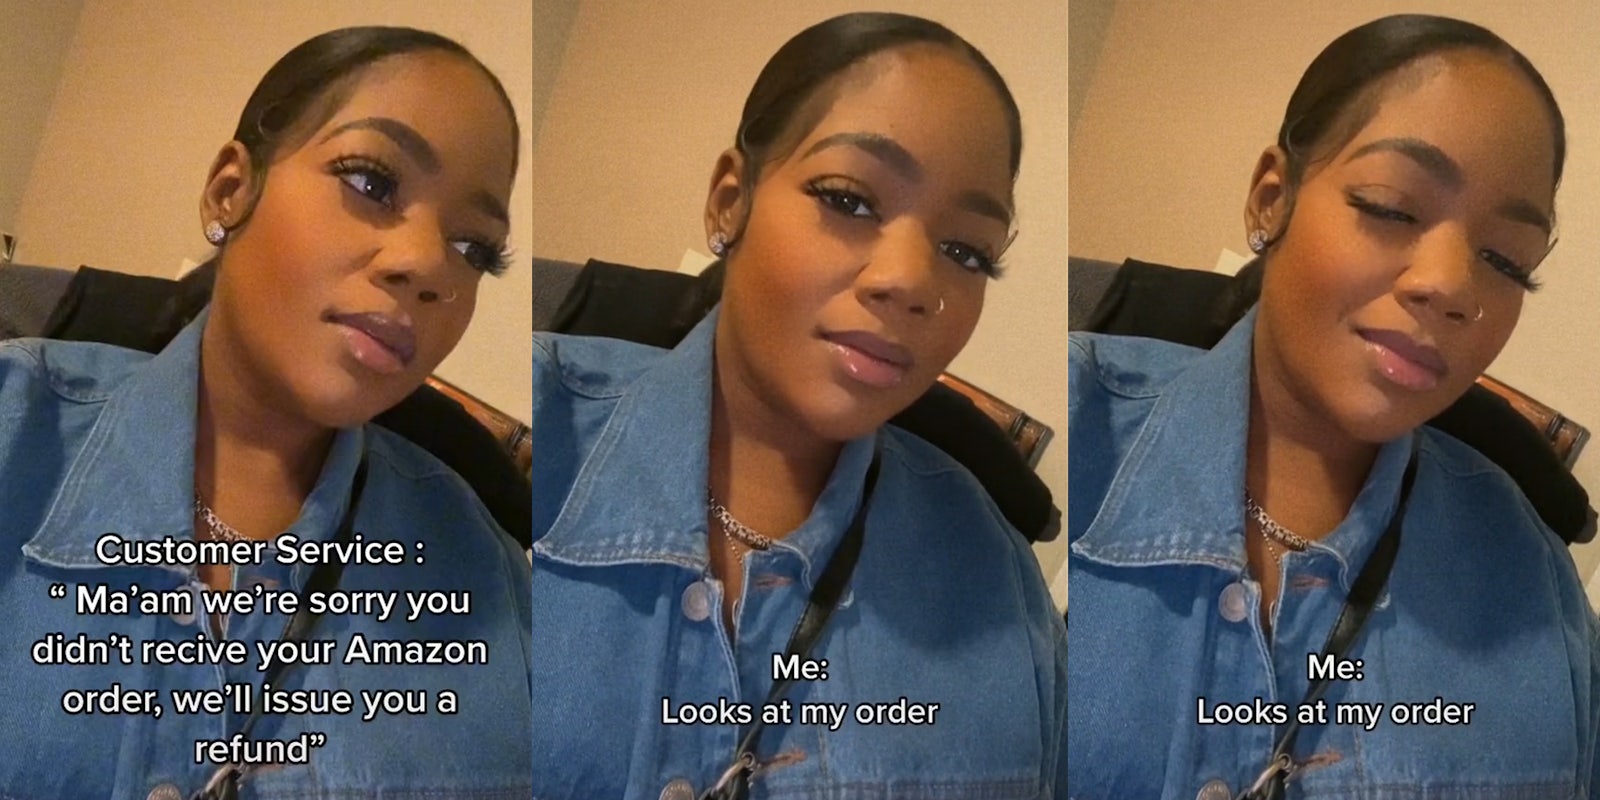 young woman in chair with captions 'Customer Service: Ma'am we're sorry you didn't recive your Amazon order, we'll issue you a refund' (l) 'Me: Looks at my order' (c) young woman winking with same caption (r)